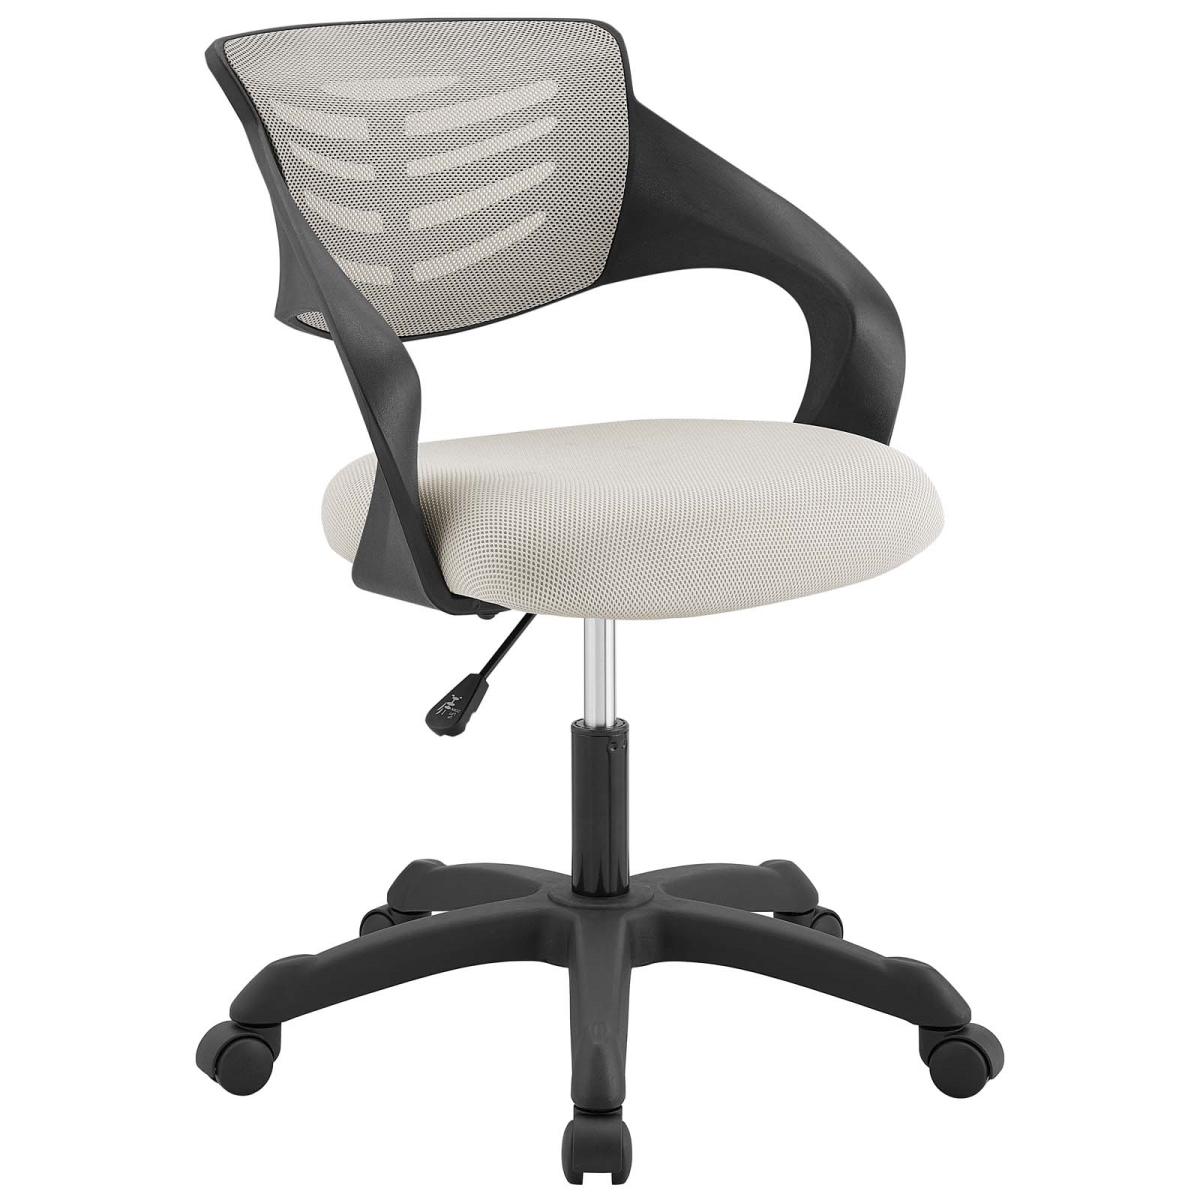 Eei-3041-gry Thrive Mesh Office Chair - Gray, 31.5 - 36 X 24.5 X 25 In.